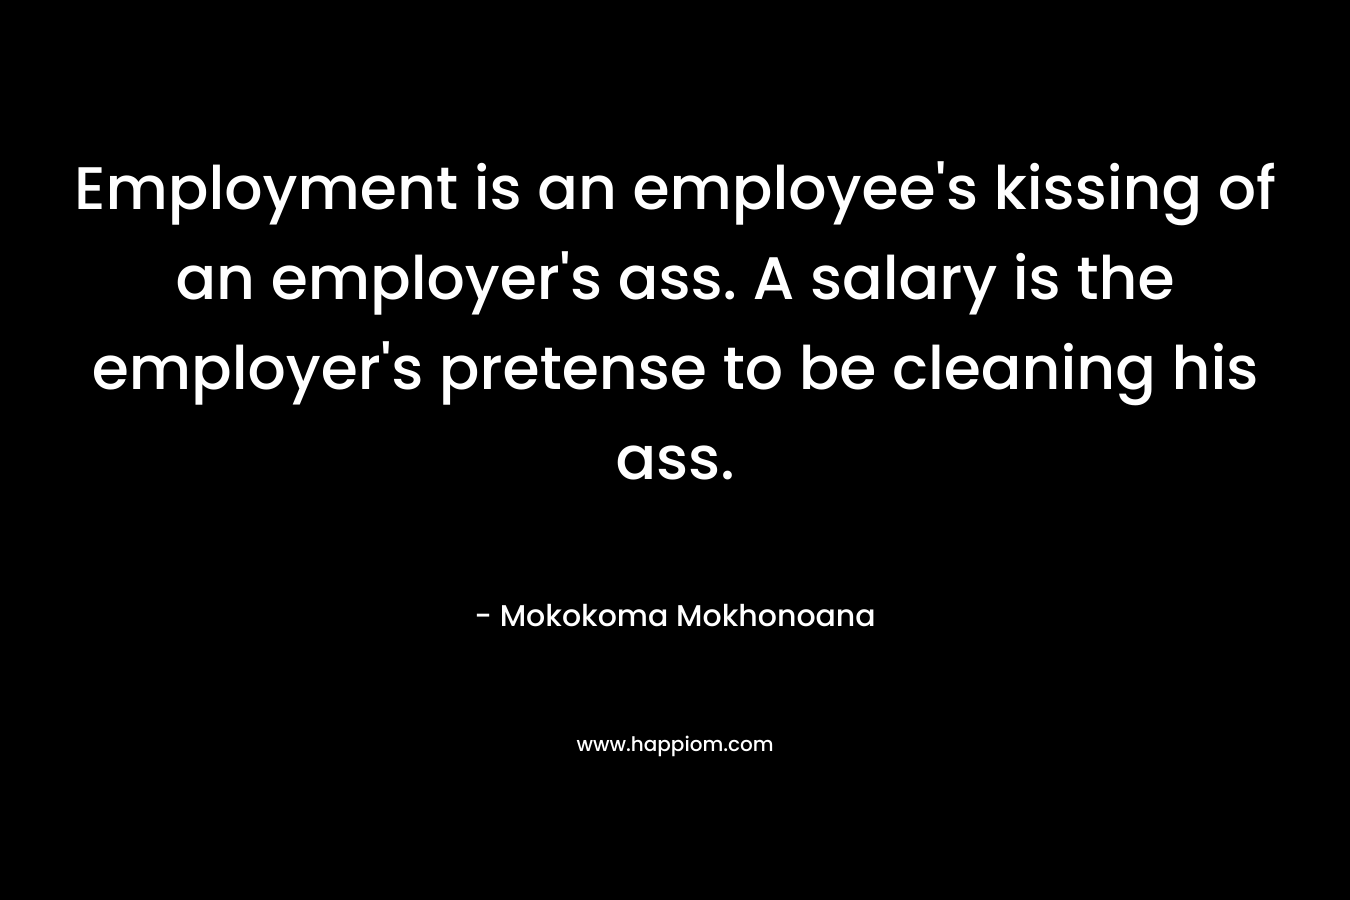 Employment is an employee's kissing of an employer's ass. A salary is the employer's pretense to be cleaning his ass.